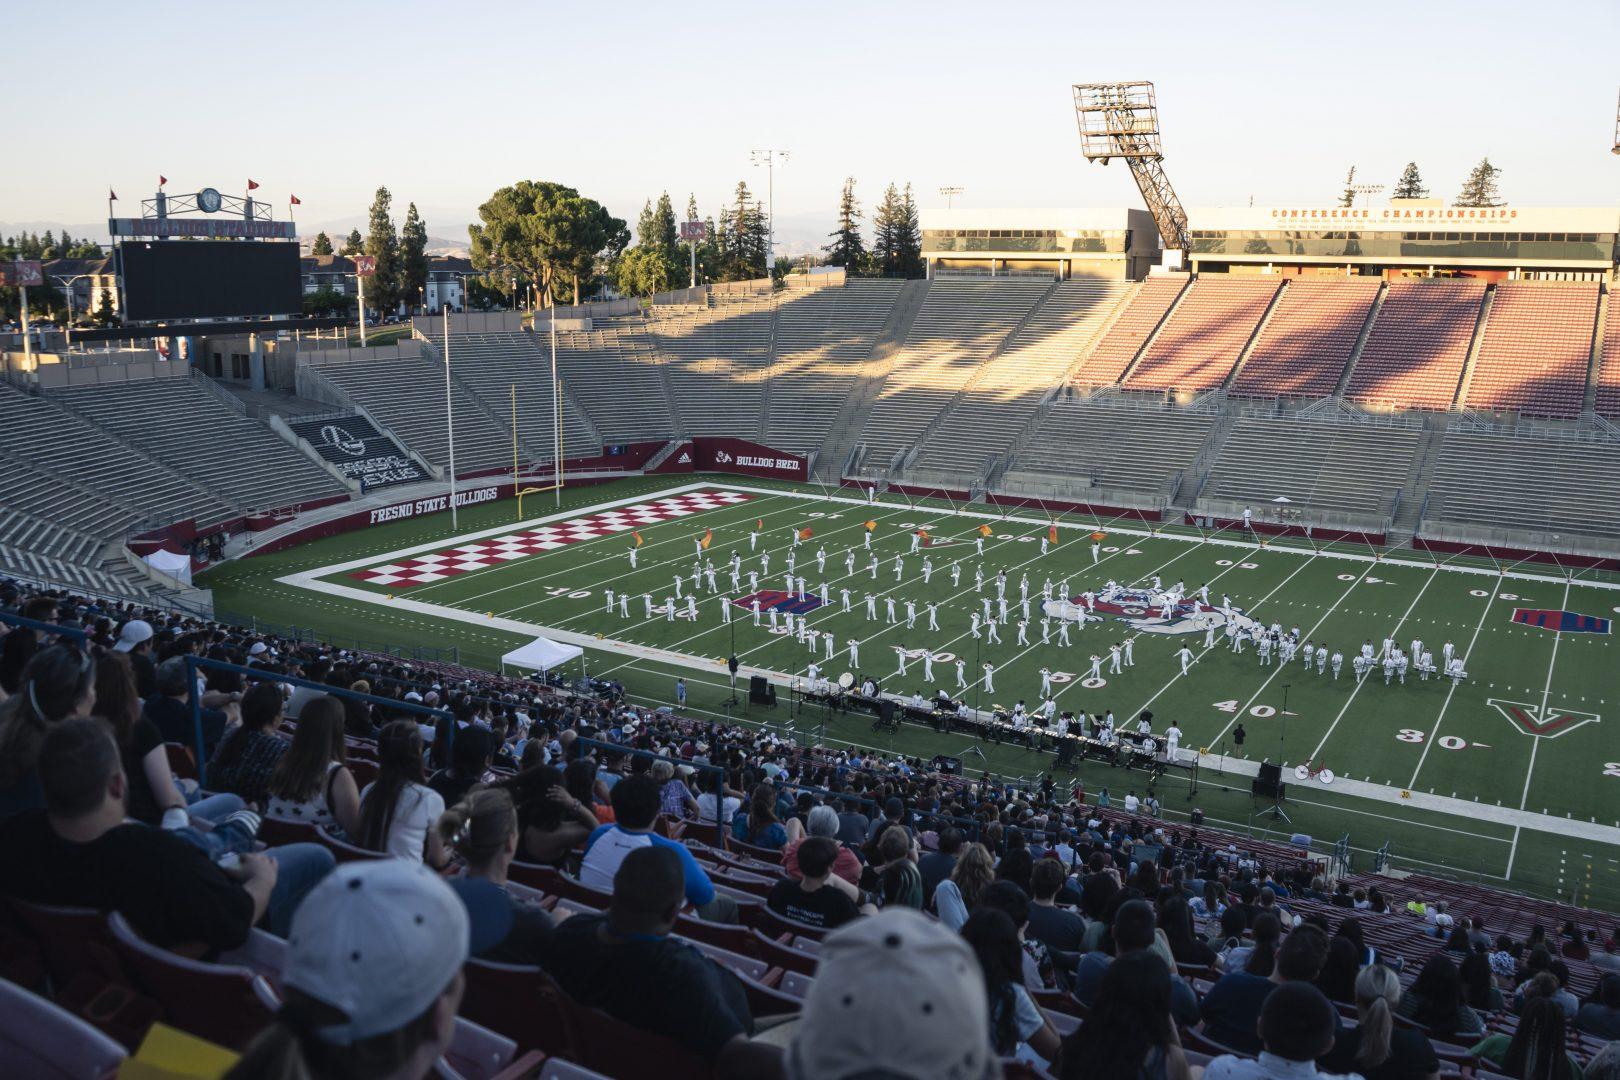 For the first time in over a decade, the MidCal Champions Showcase competition was hosted at Bulldog Stadium on July 5, 2022. (Wyatt Bible/ The Collegian)